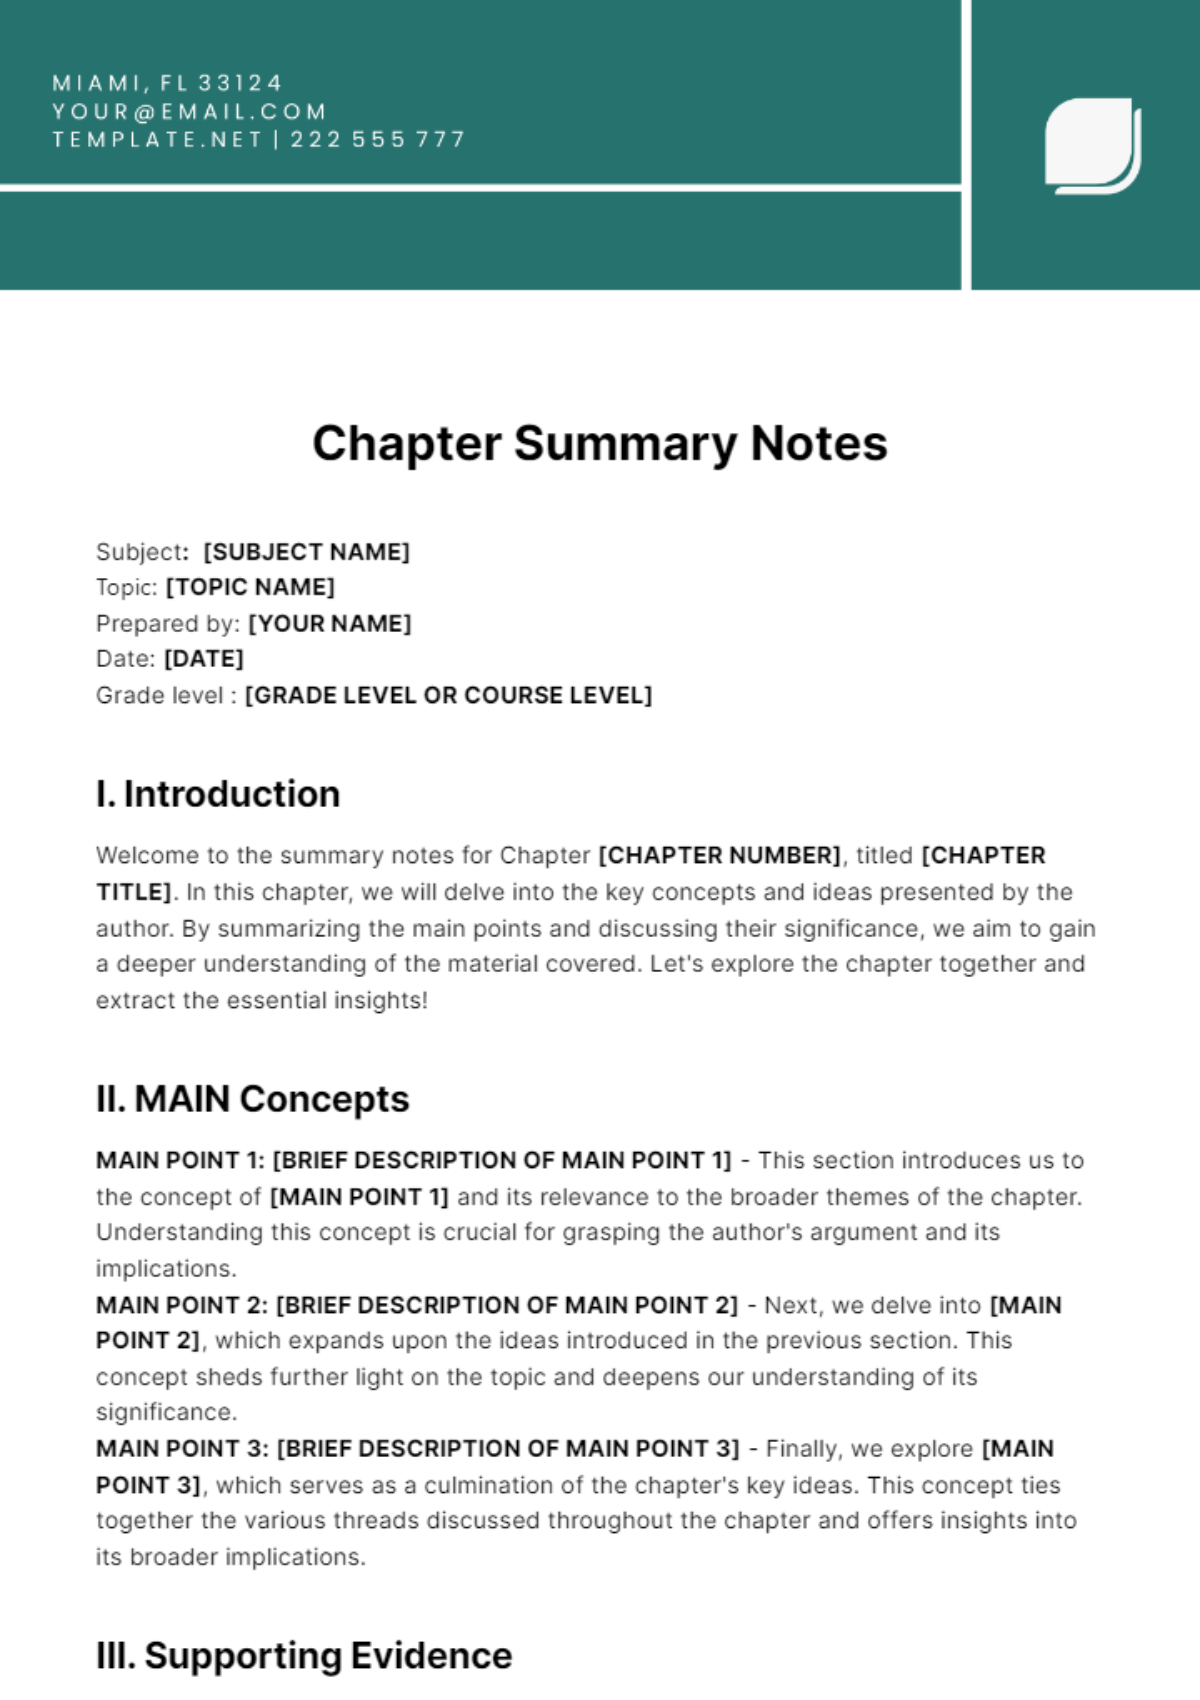 Chapter Summary Notes Template